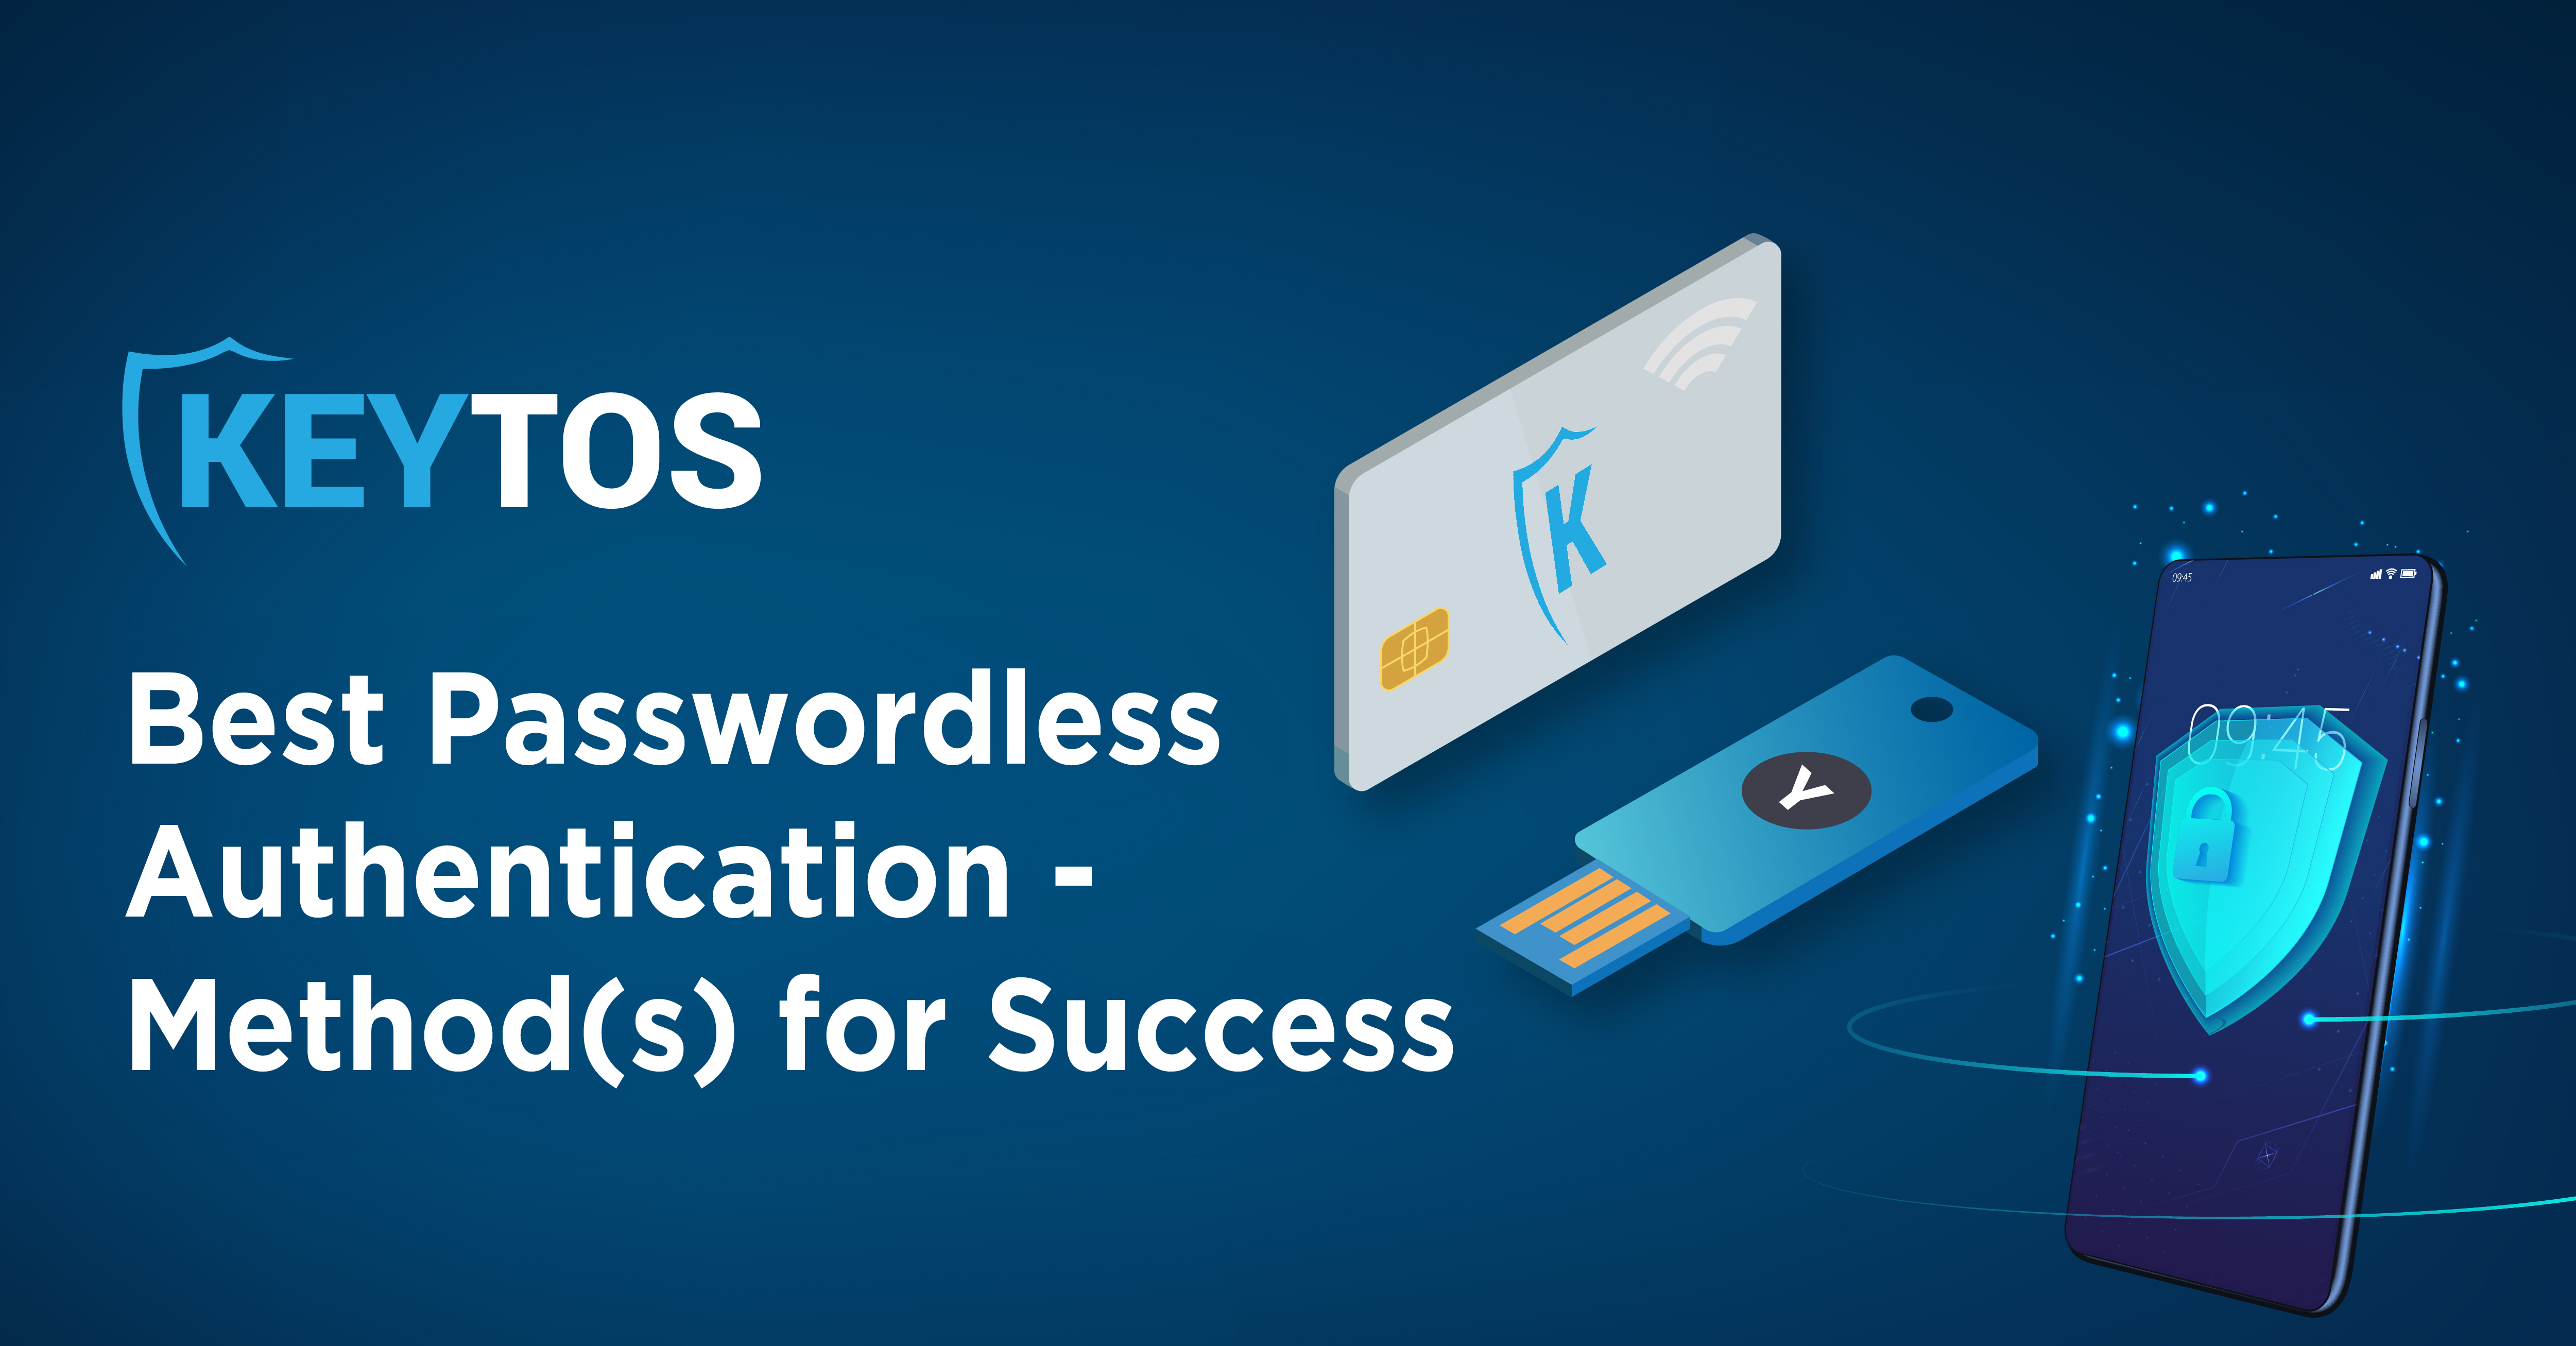 What are the Best Passwordless Authentication Methods?